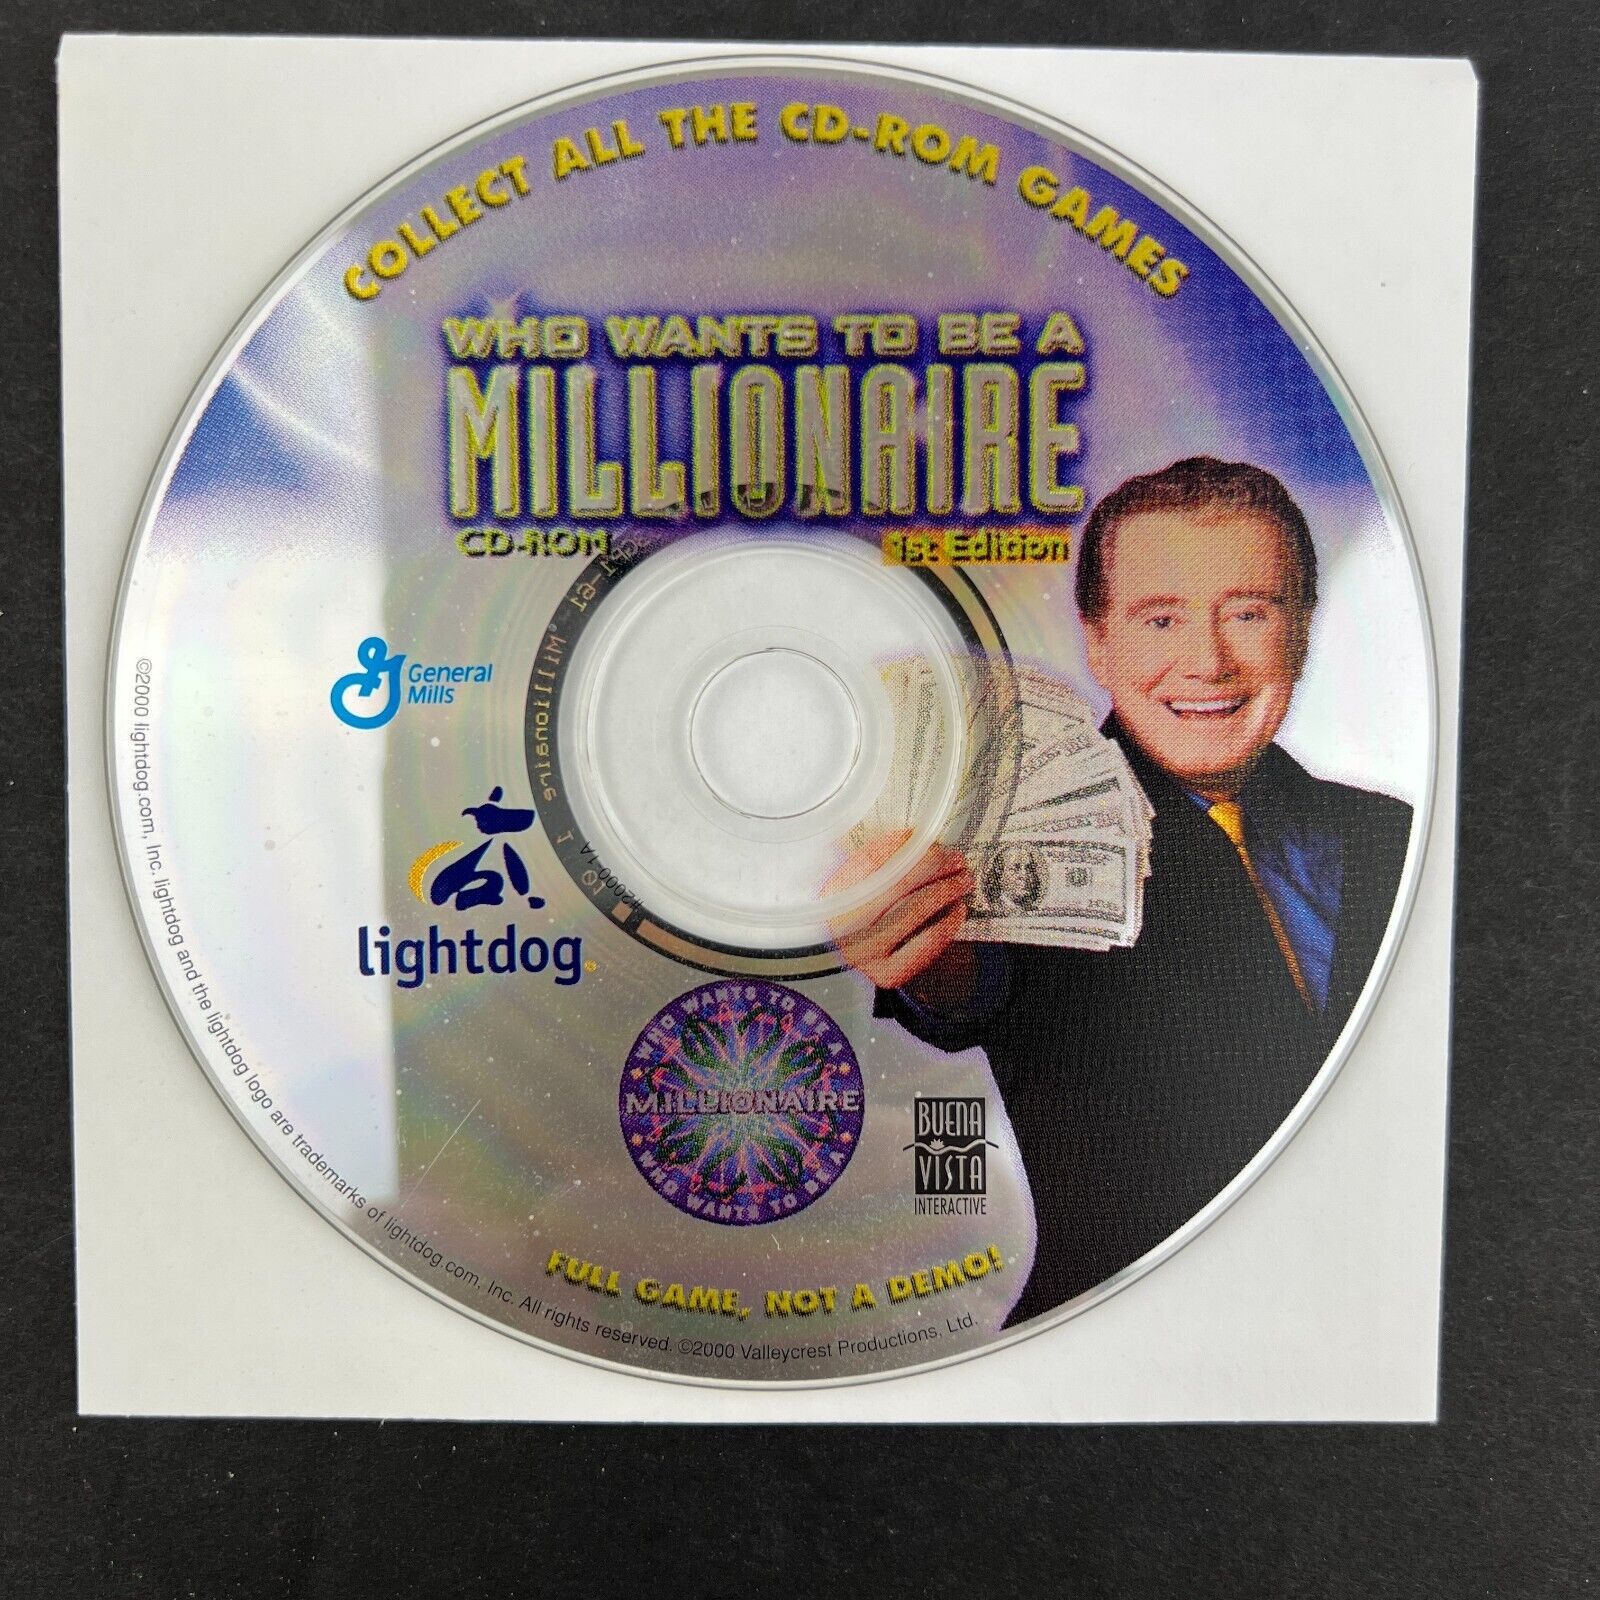 Who Wants to Be a Millionaire CD-ROM 1st Edition General Mills Cereal Promotion